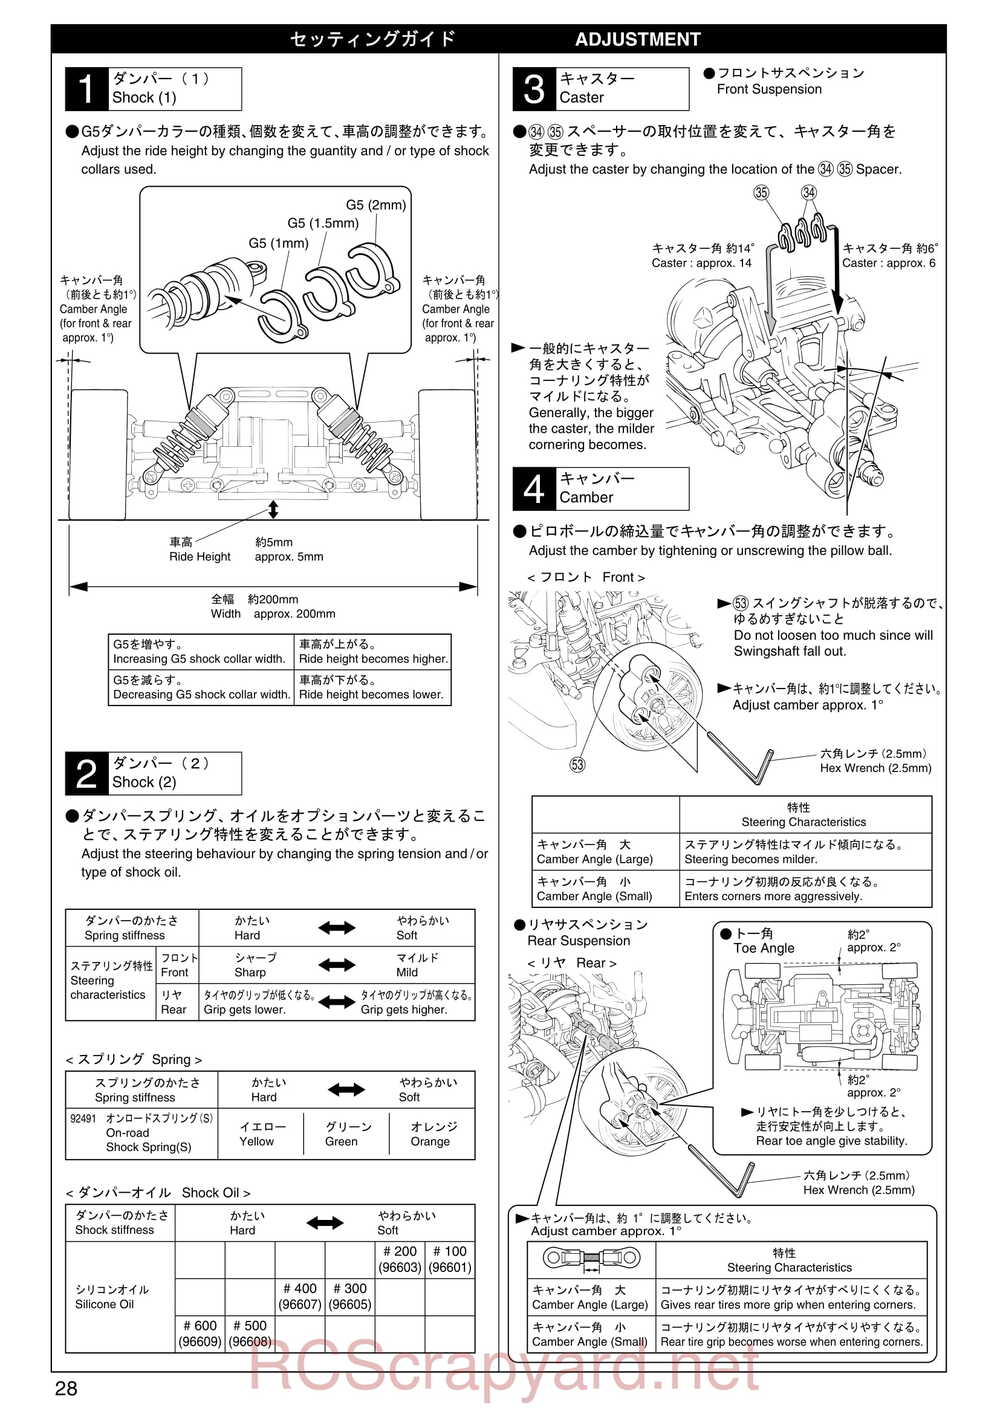 Kyosho - 31241 - V-One-S - Manual - Page 28